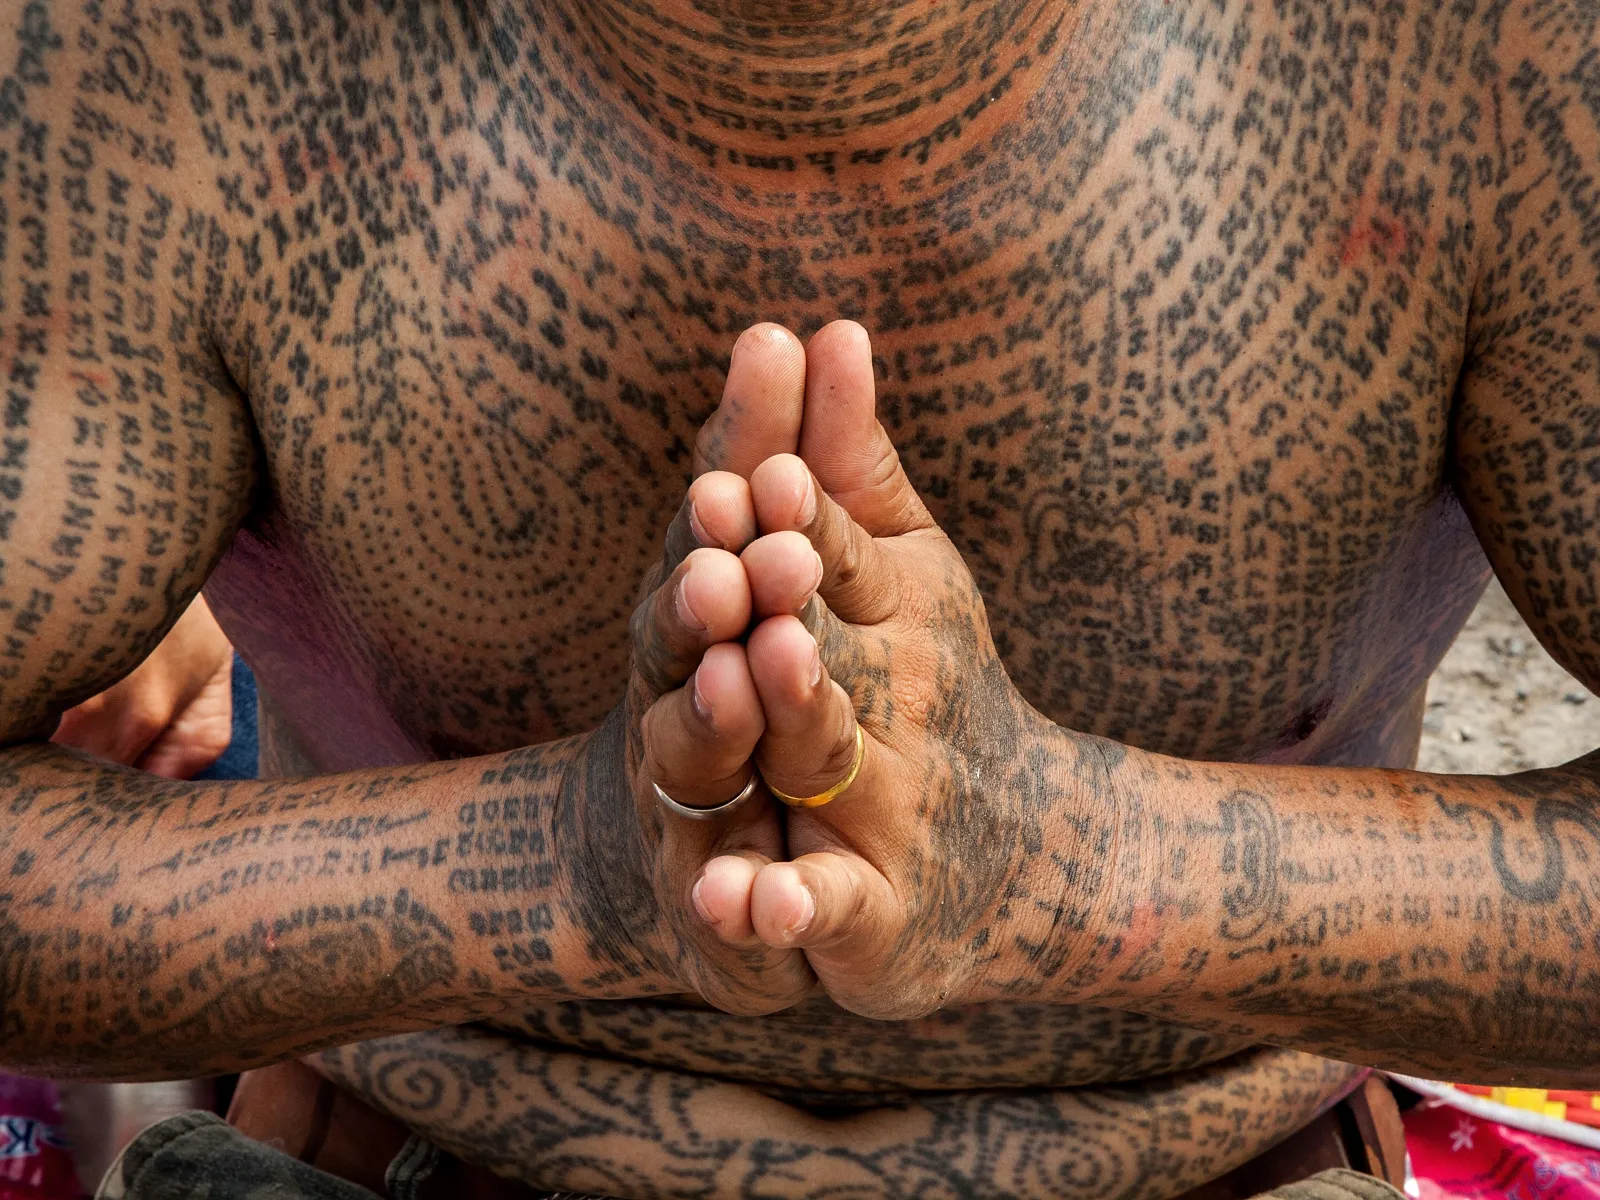 Black tattoo artists push for diversity in the white-dominated industry -  Good Morning America